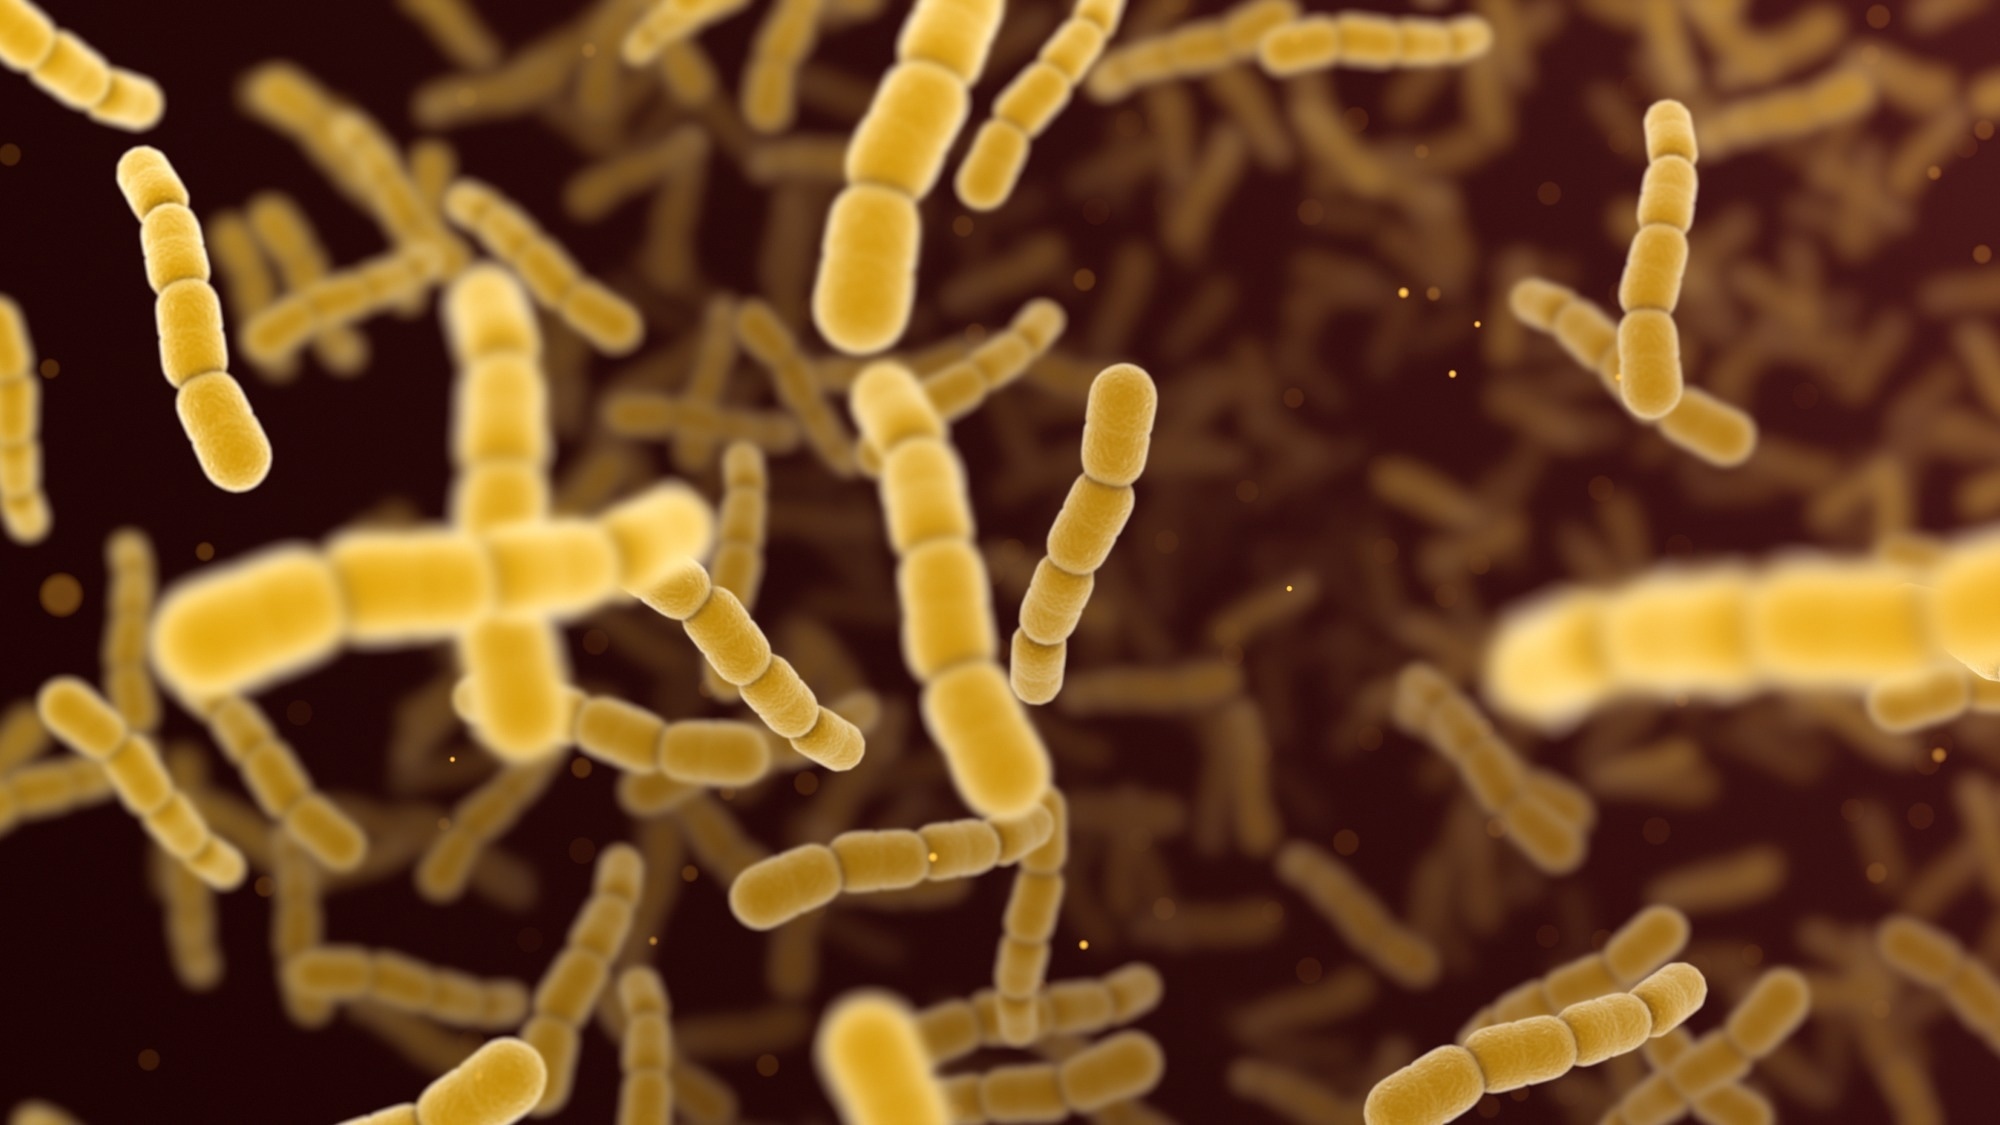 Study: Human Fecal Carriage of Streptococcus agalactiae Sequence Type 283, Thailand. Image Credit: Jezper/Shutterstock.com